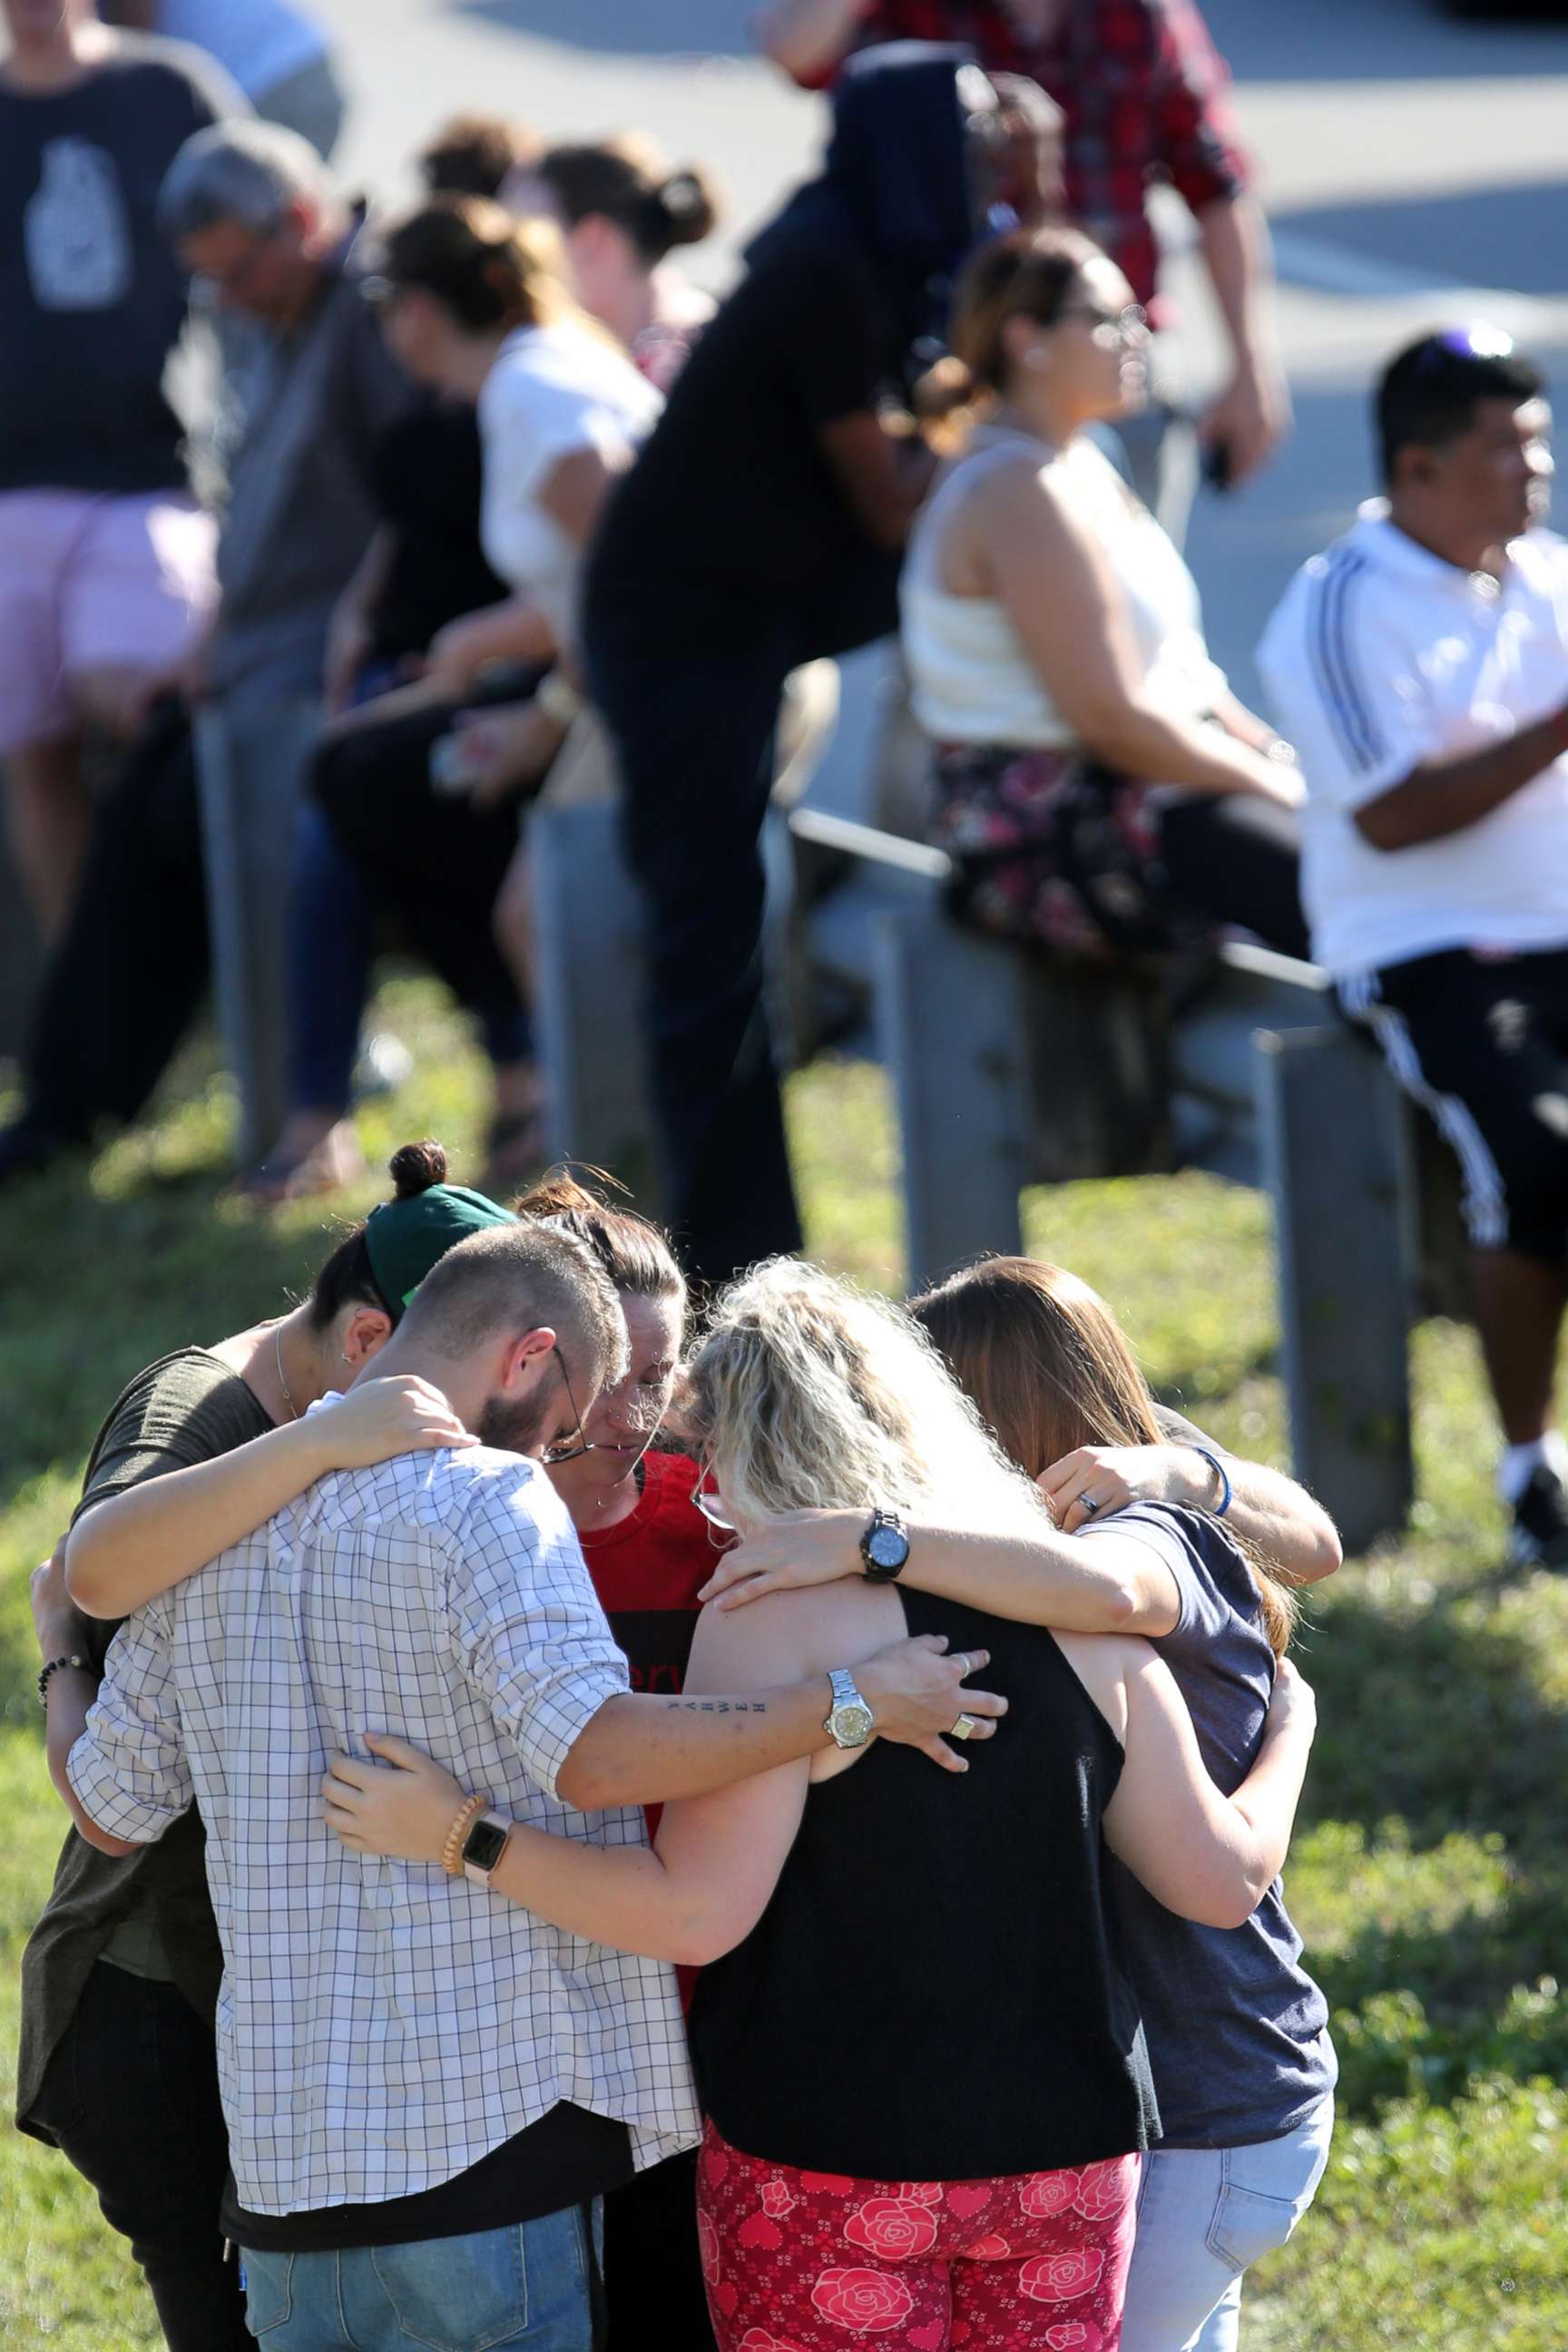 PHOTO: People bow their heads while waiting for word from students at Stoneman Douglas High School in Parkland, Fla., after a shooting on Feb. 14, 2018.